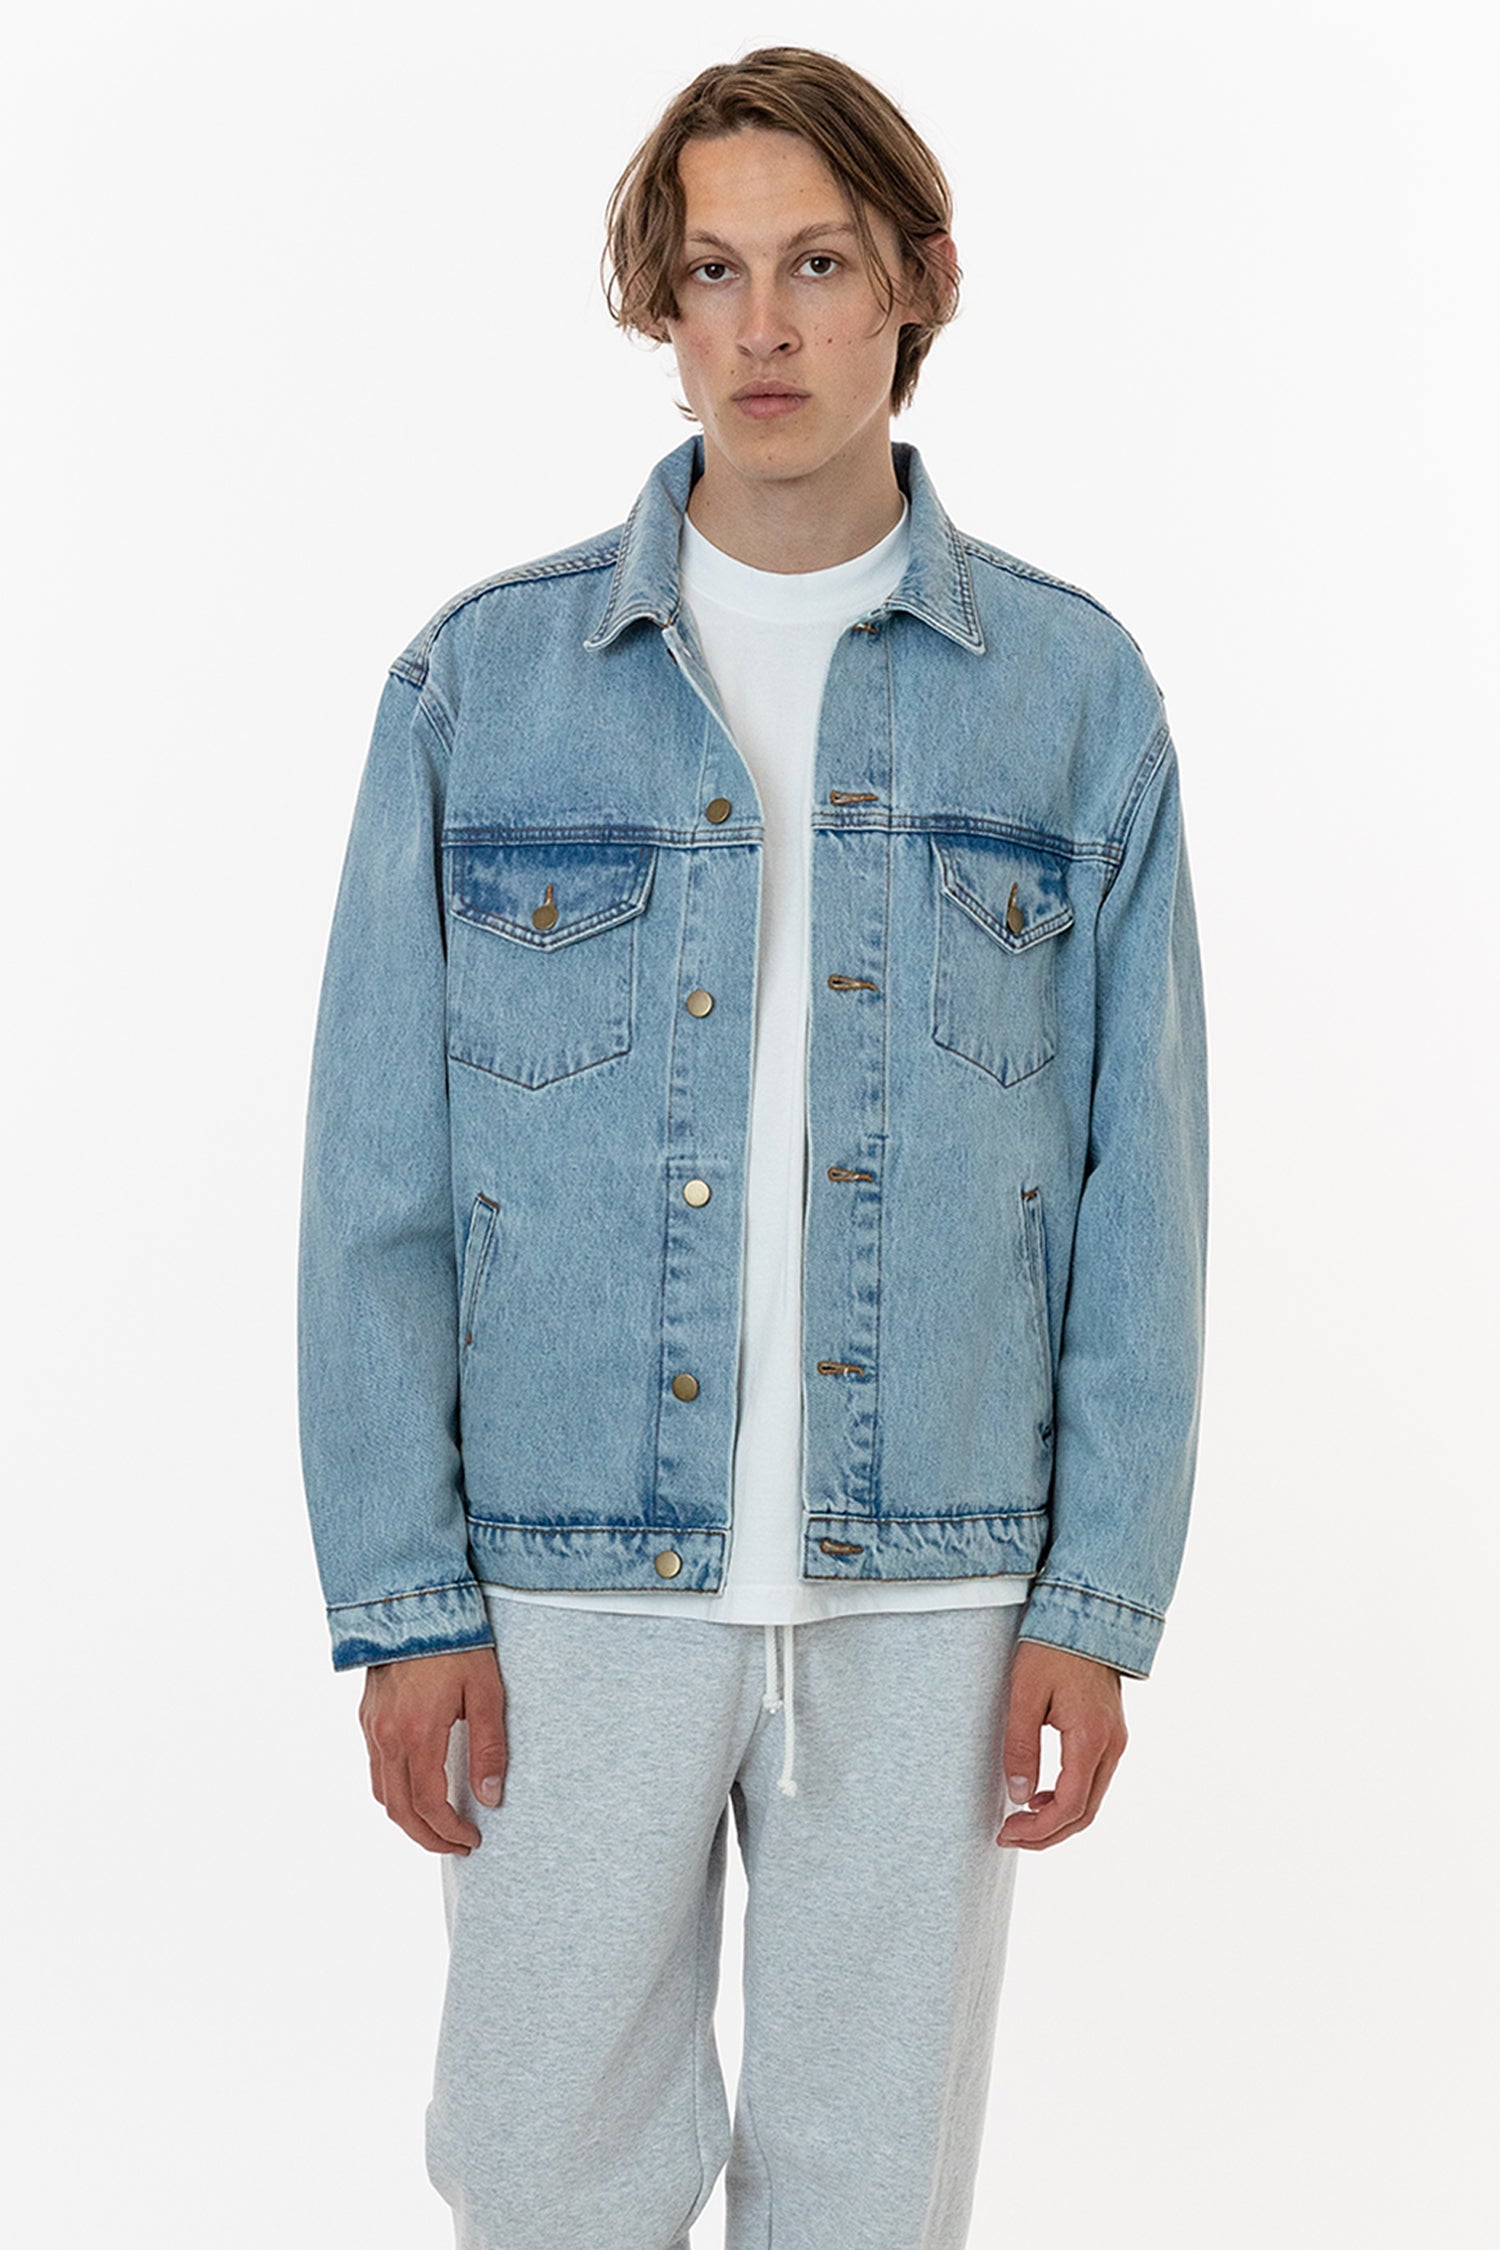 Mens Slim Fit Denim Jacket For Spring And Autumn Streetwear, Washed Jean  Style, Casual Cowboy Mens Outerwear In M 4XL Sizes 230509 From Kong02,  $72.21 | DHgate.Com